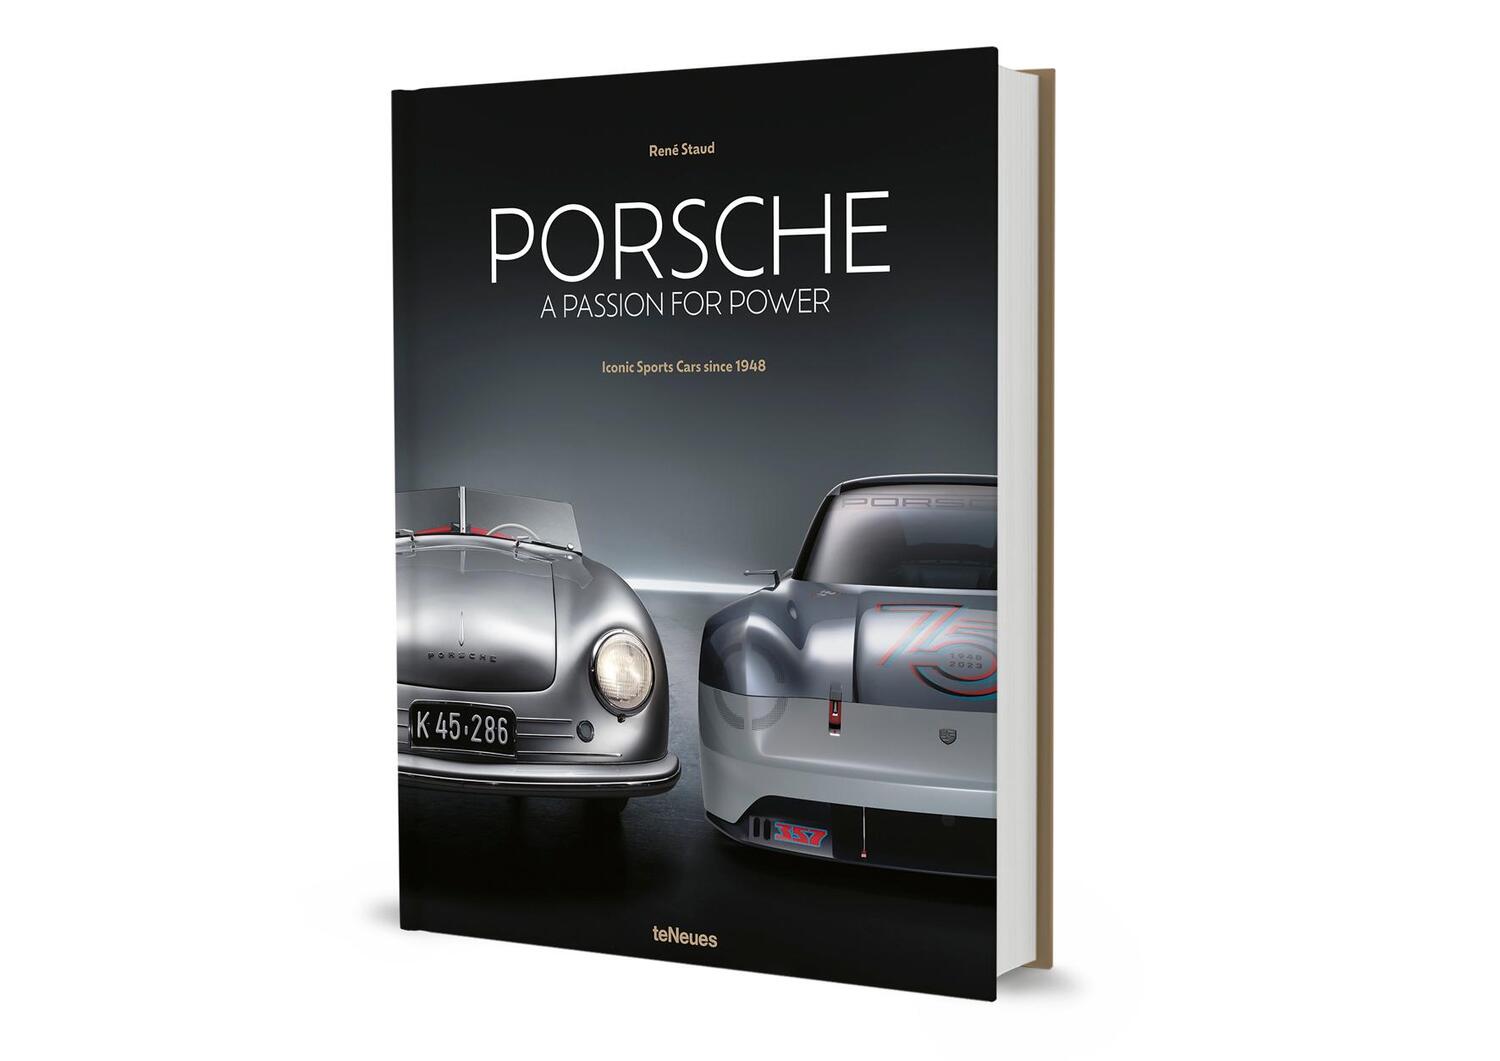 Bild: 9783961715220 | Porsche - A Passion for Power | Iconic Sports Cars since 1948 | Staud